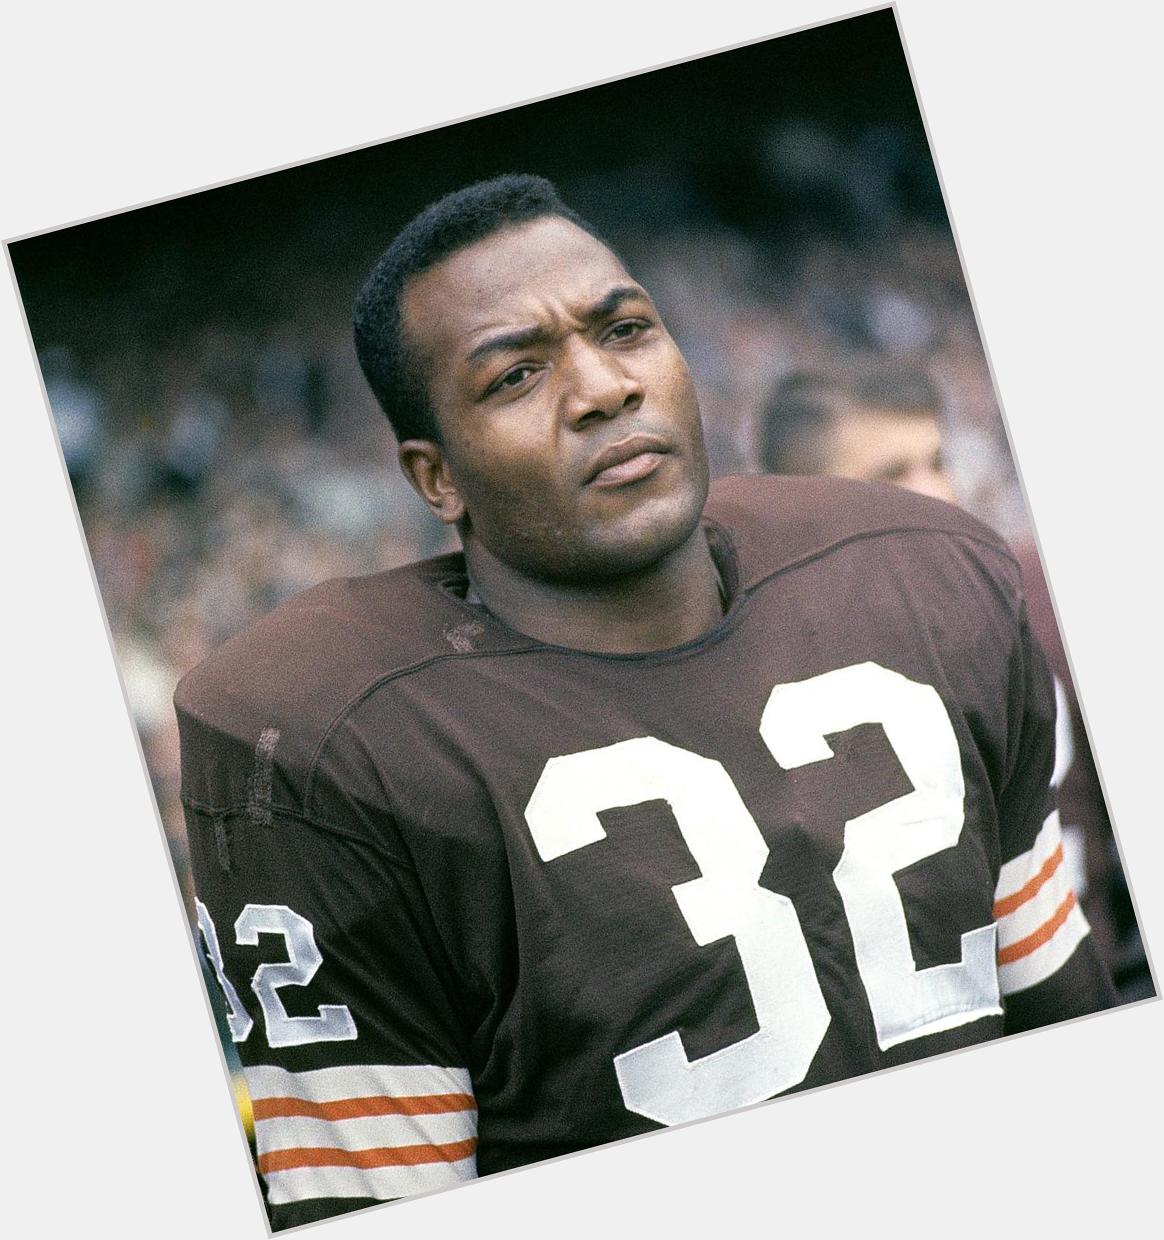 HAPPY 81ST BIRTHDAY THE GREAT JIM BROWN! 